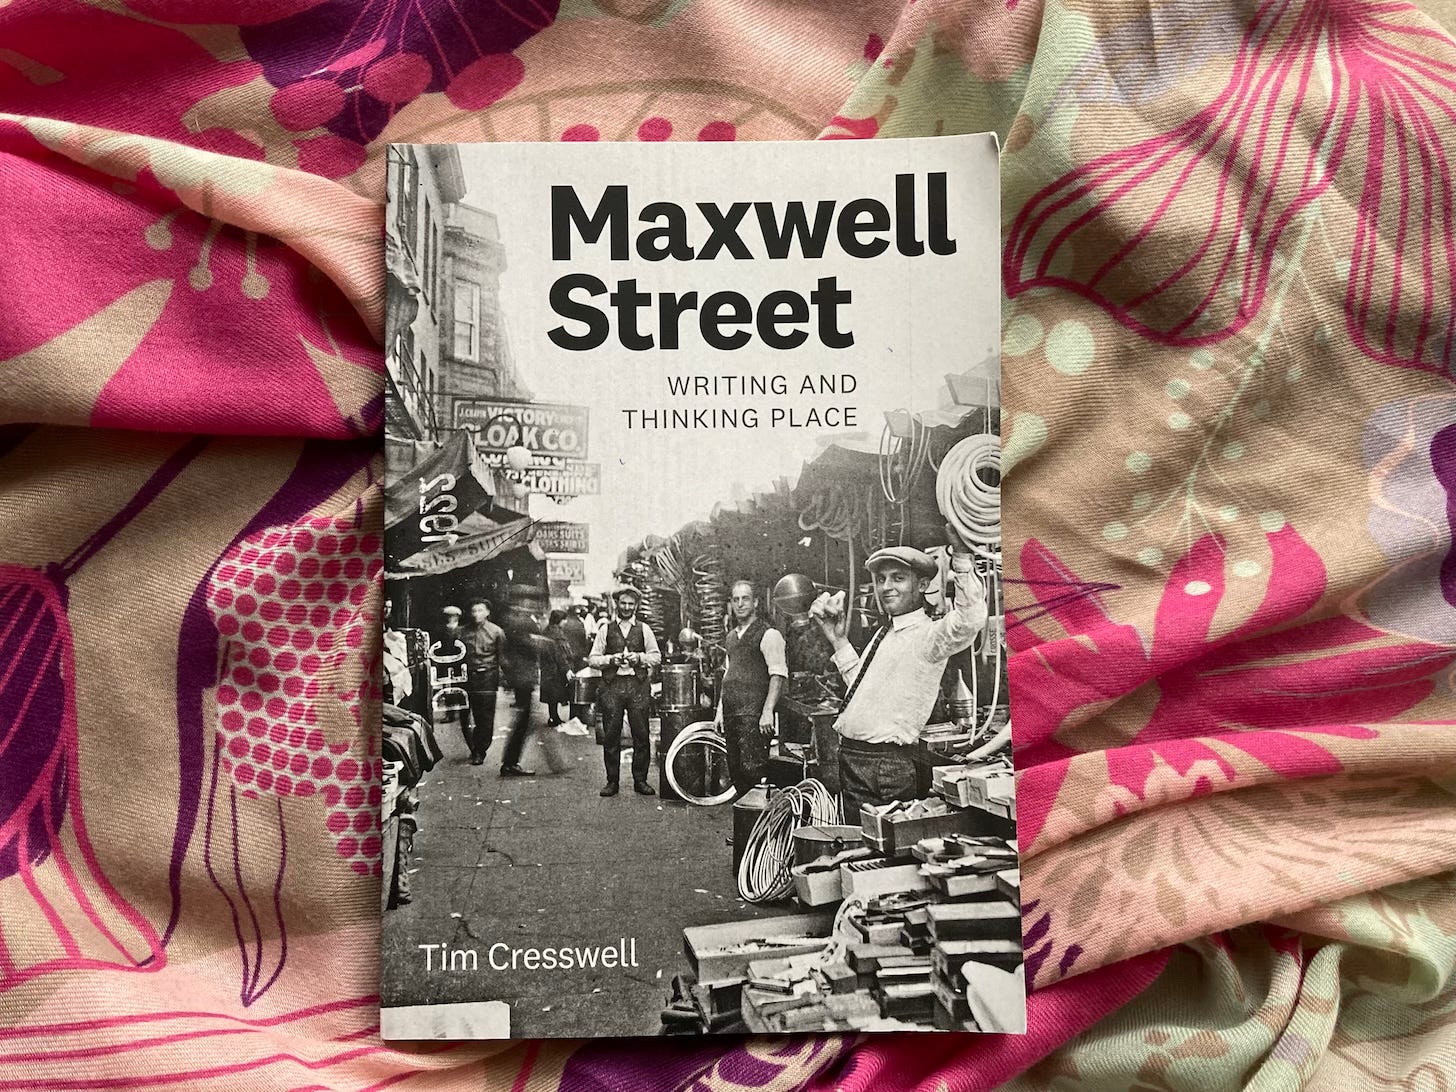 Maxwell Street by Tim Cresswell book review by Yasmin Chopin